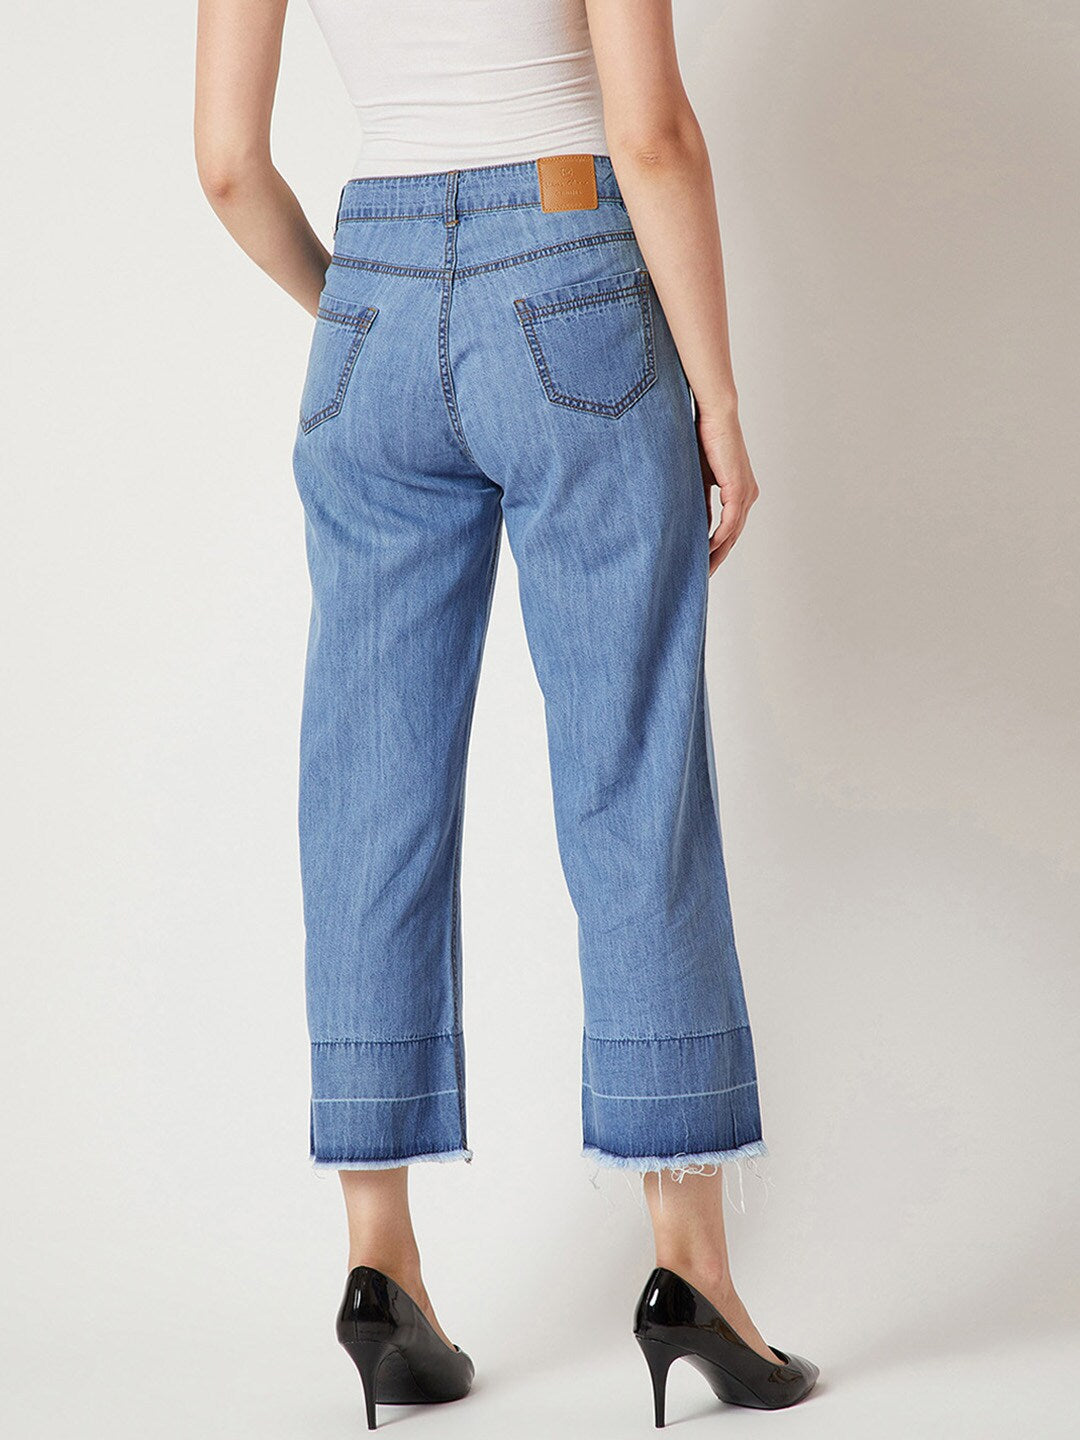 miss chase high waist jeans